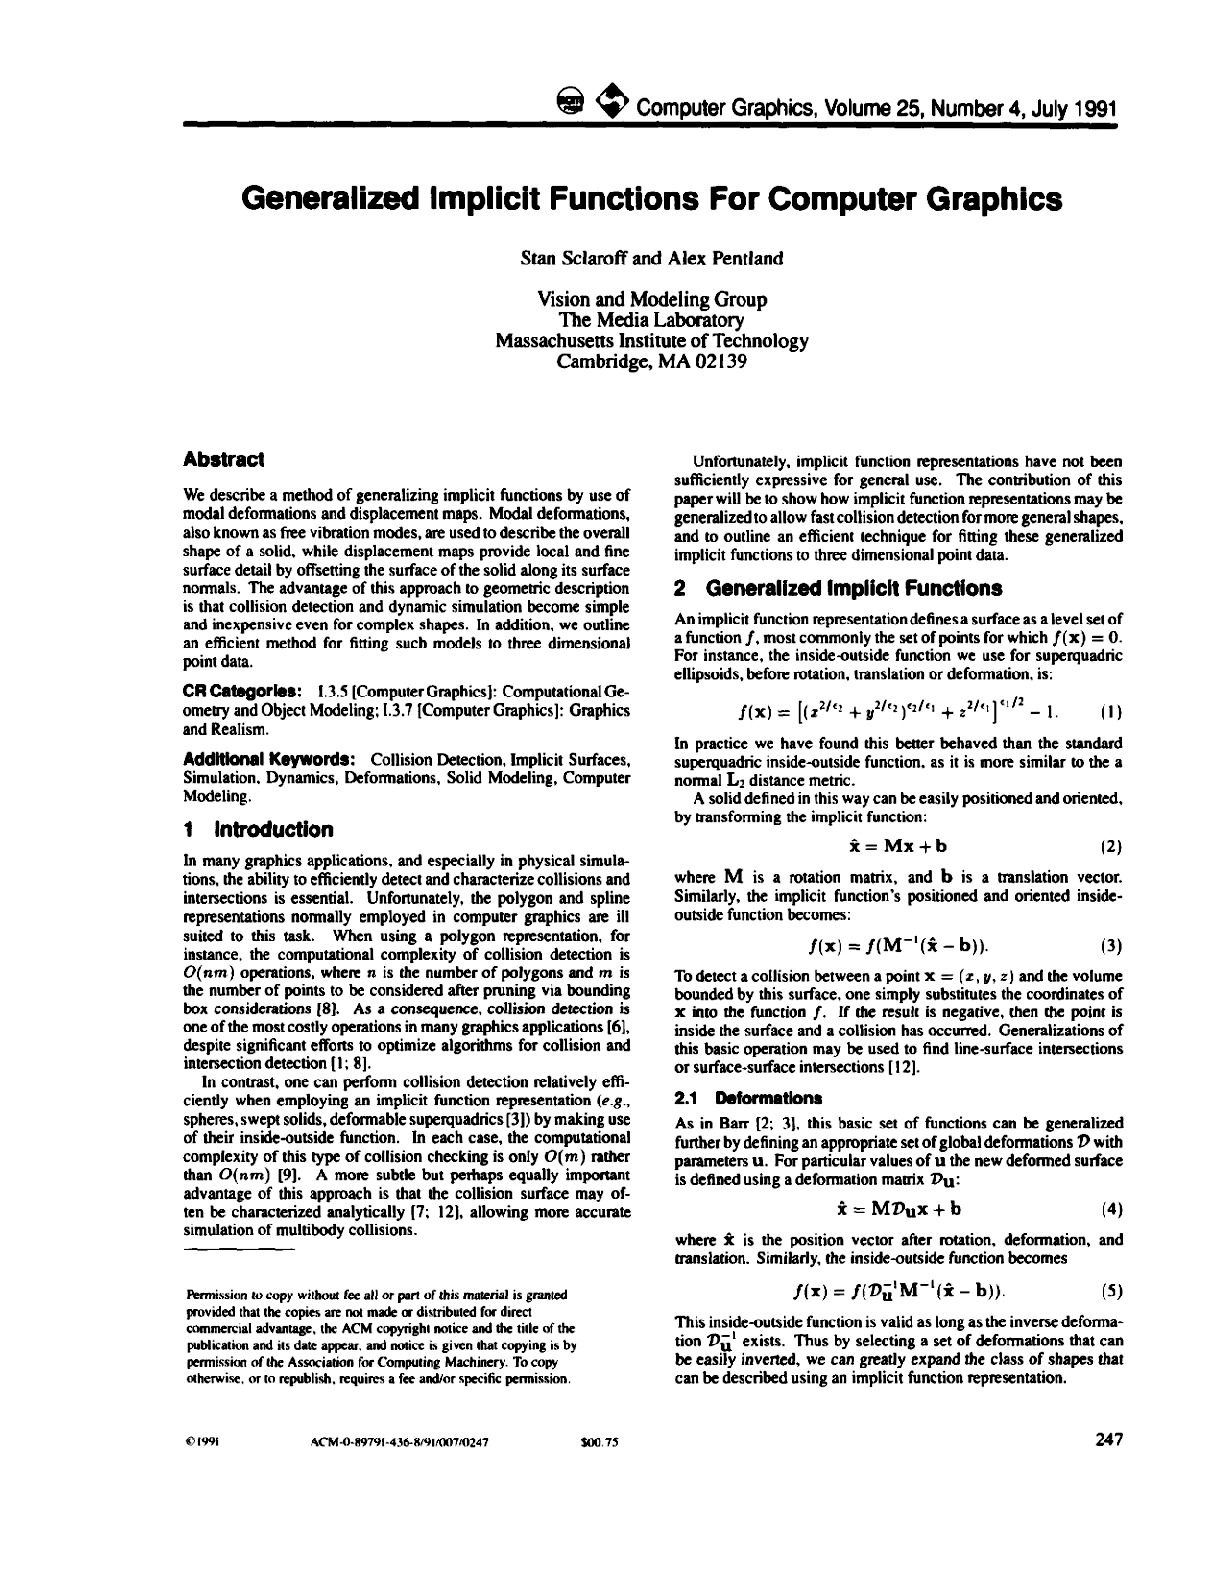 Sclaroff S., Generalized implicit functions for computer graphics